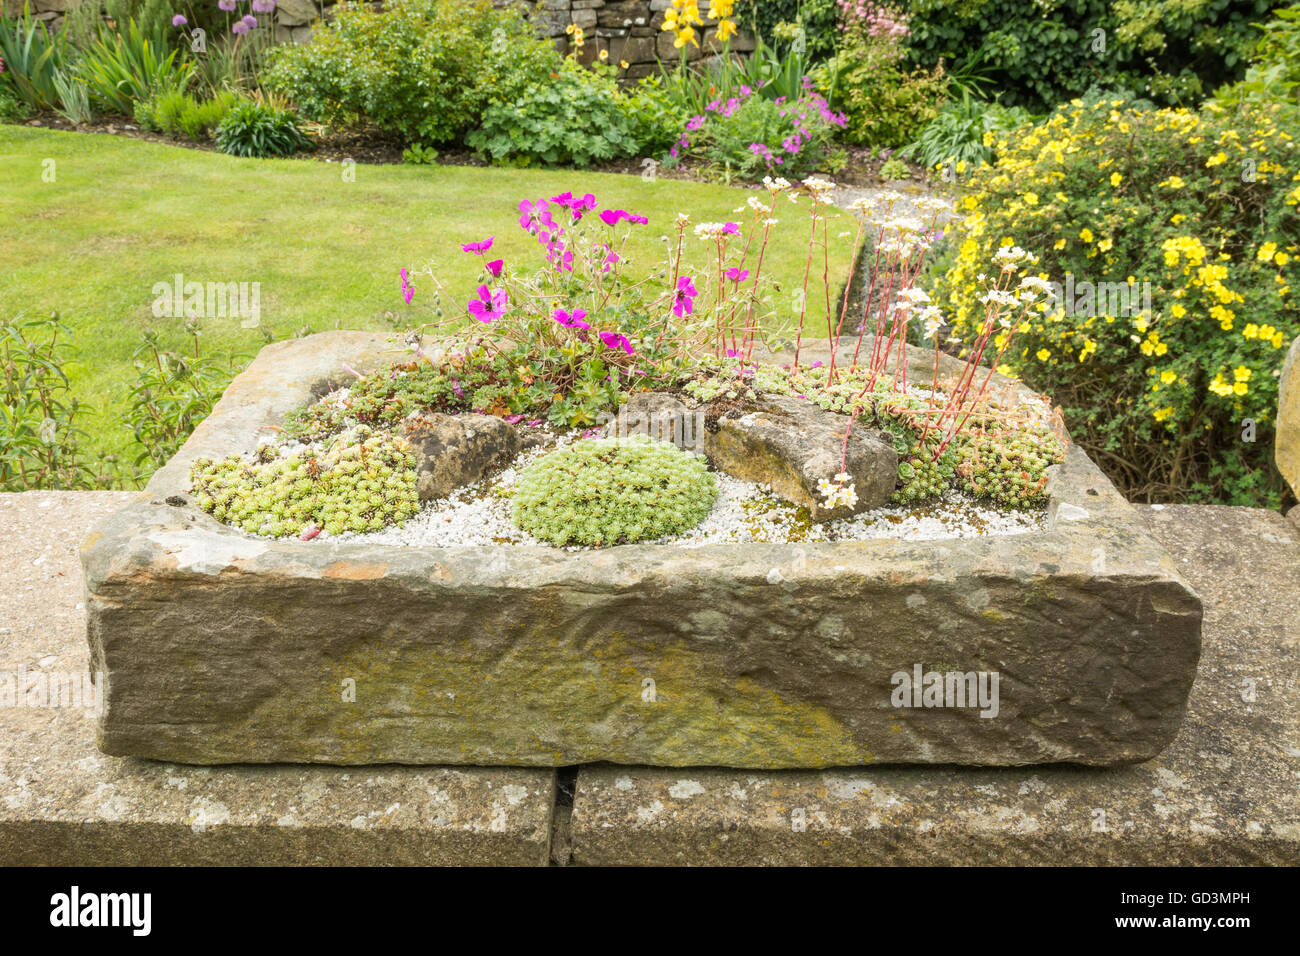 Alpines in a stone sink Stock Photo